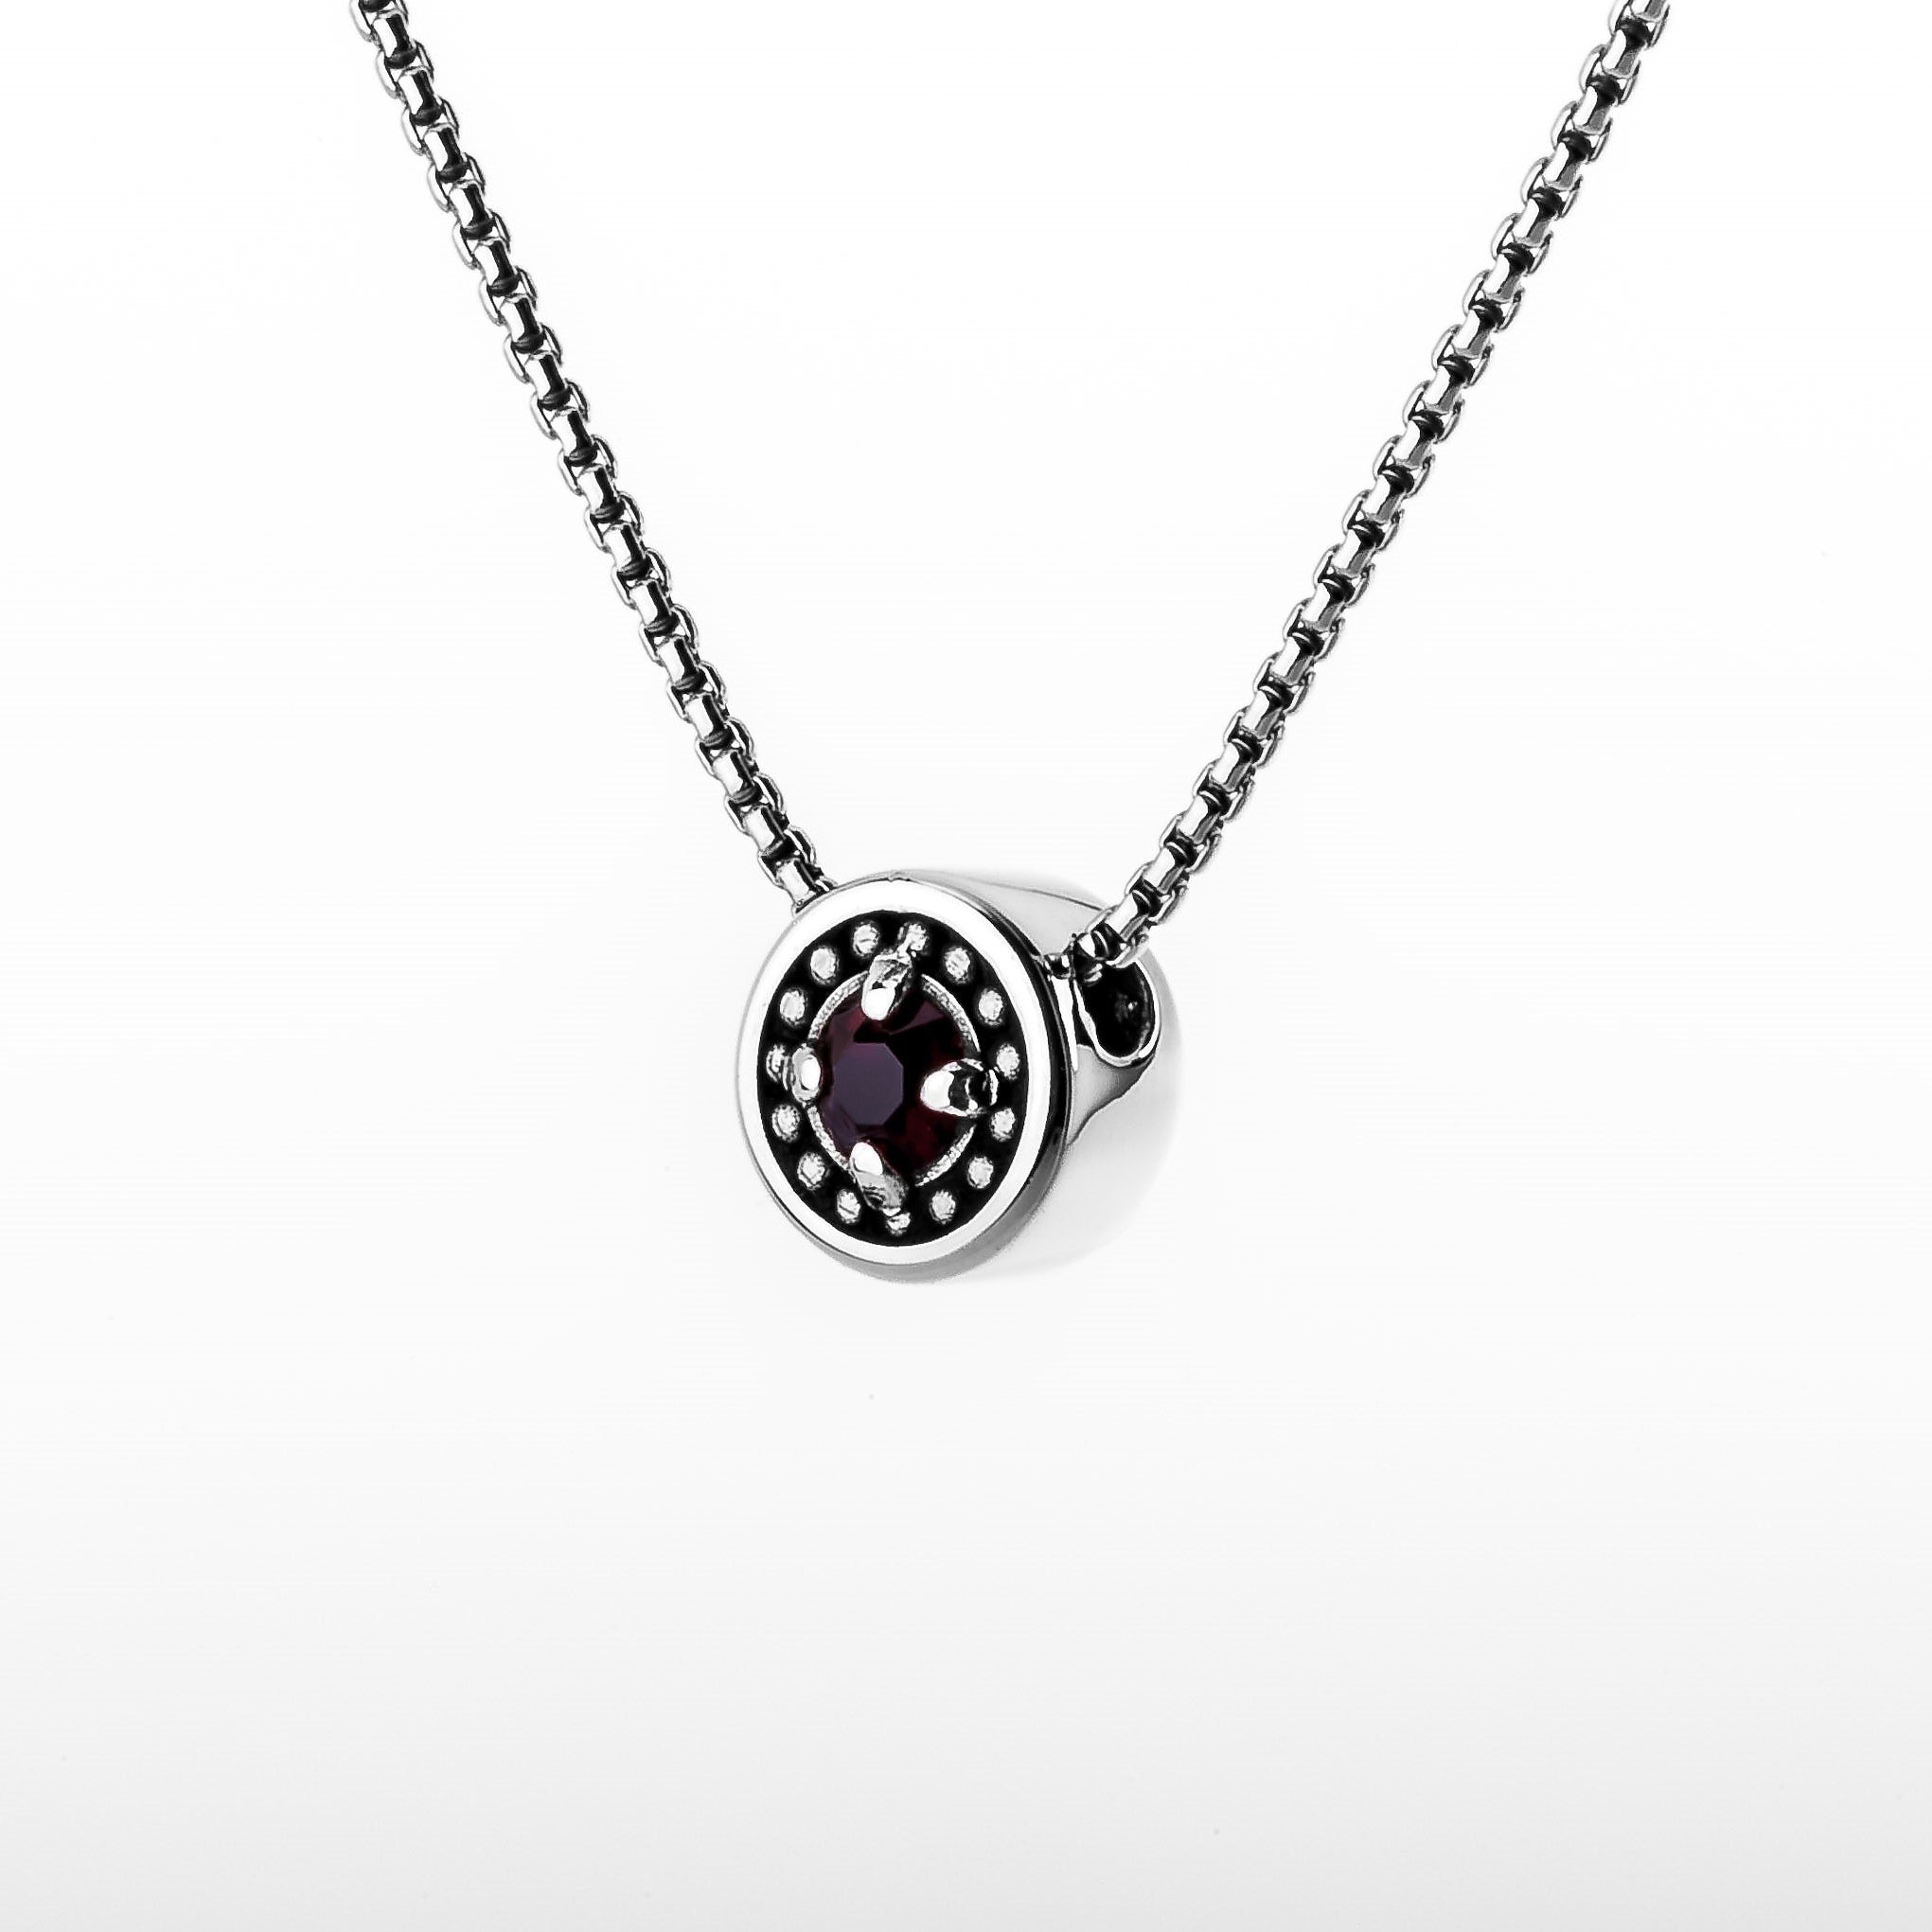 January Birthstone Necklace - The Generations "Petite"